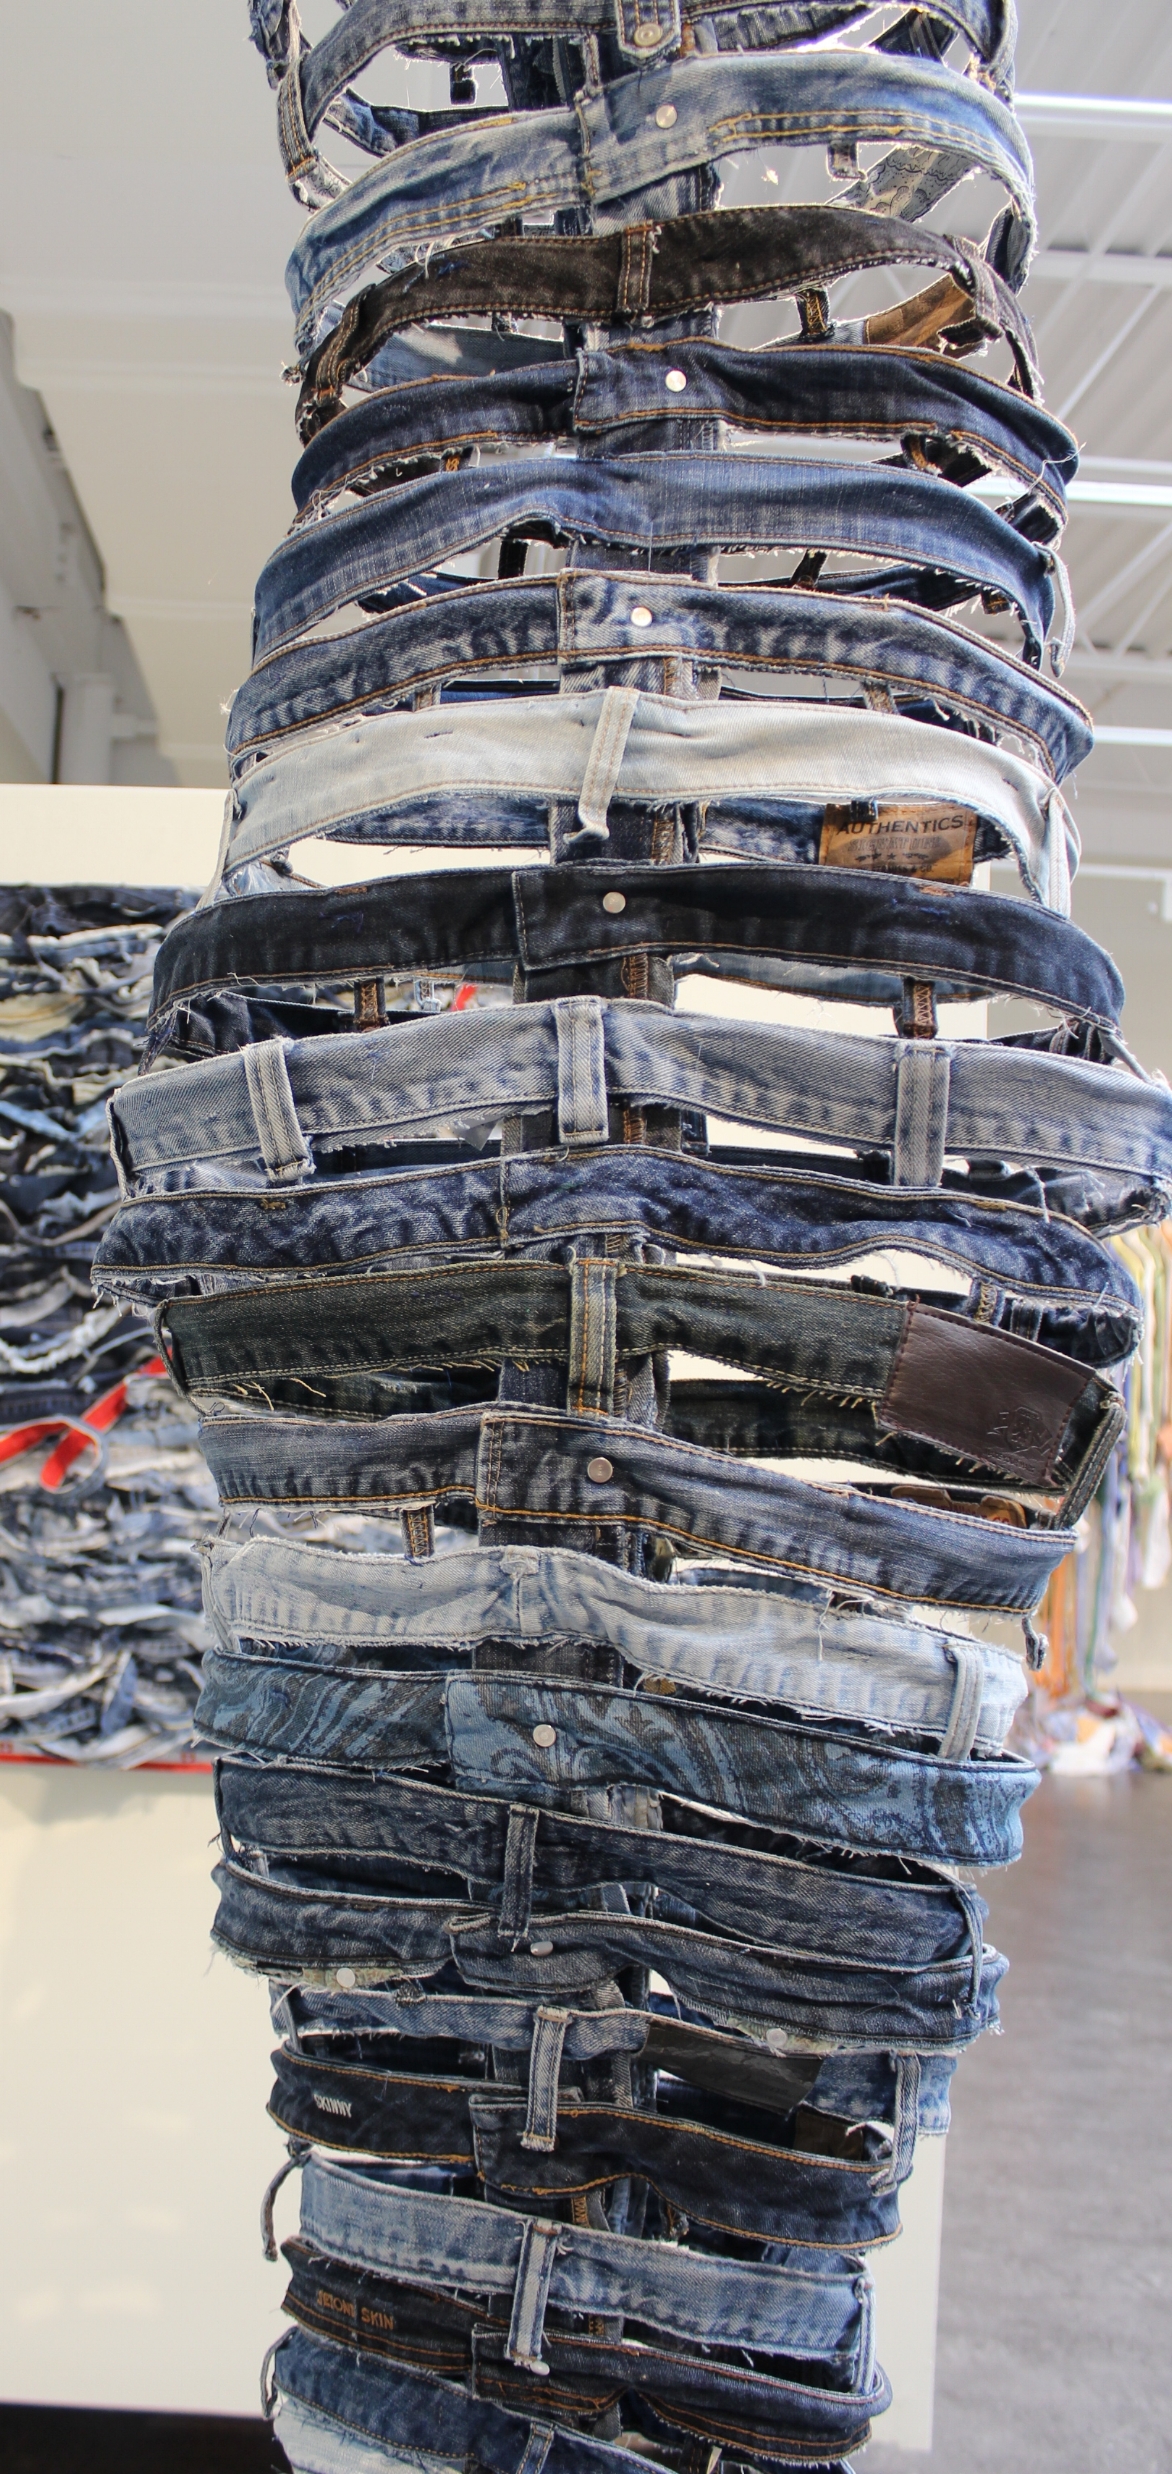 "When did jeans become fast fashion?" (detail)